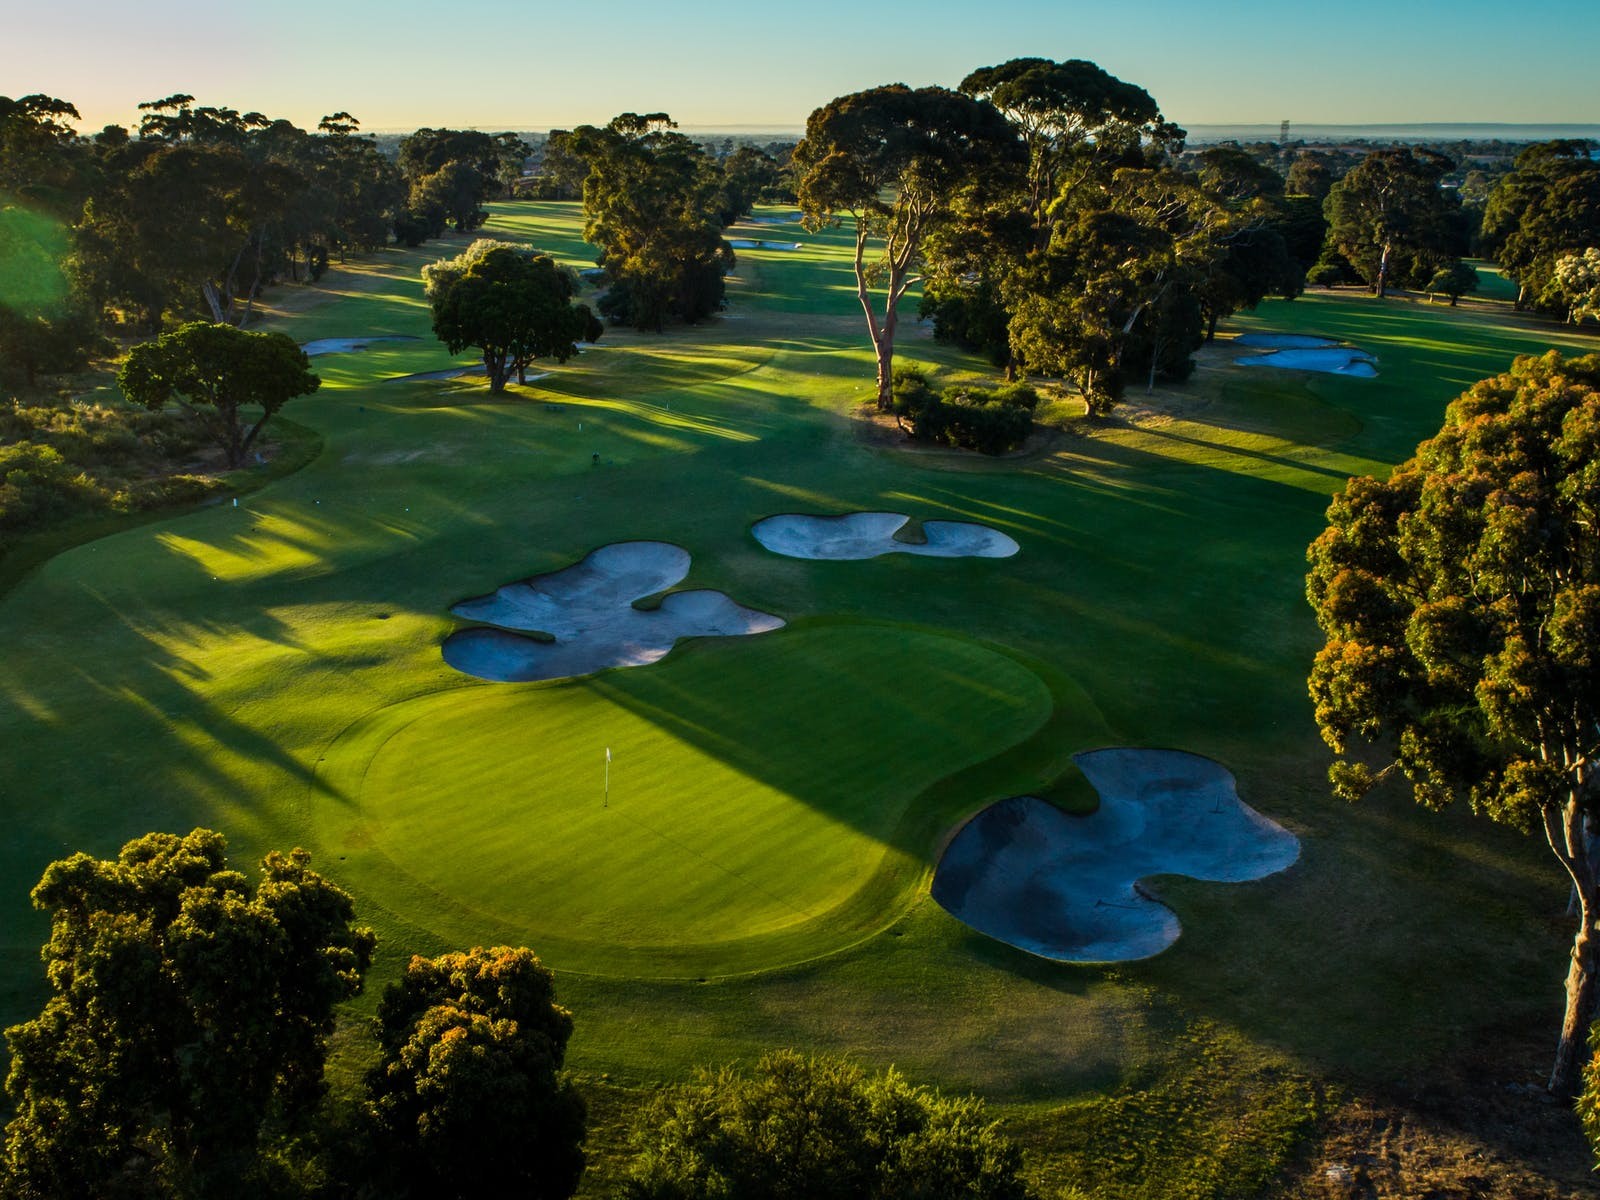 The Beginners Guide to Golf Course Design